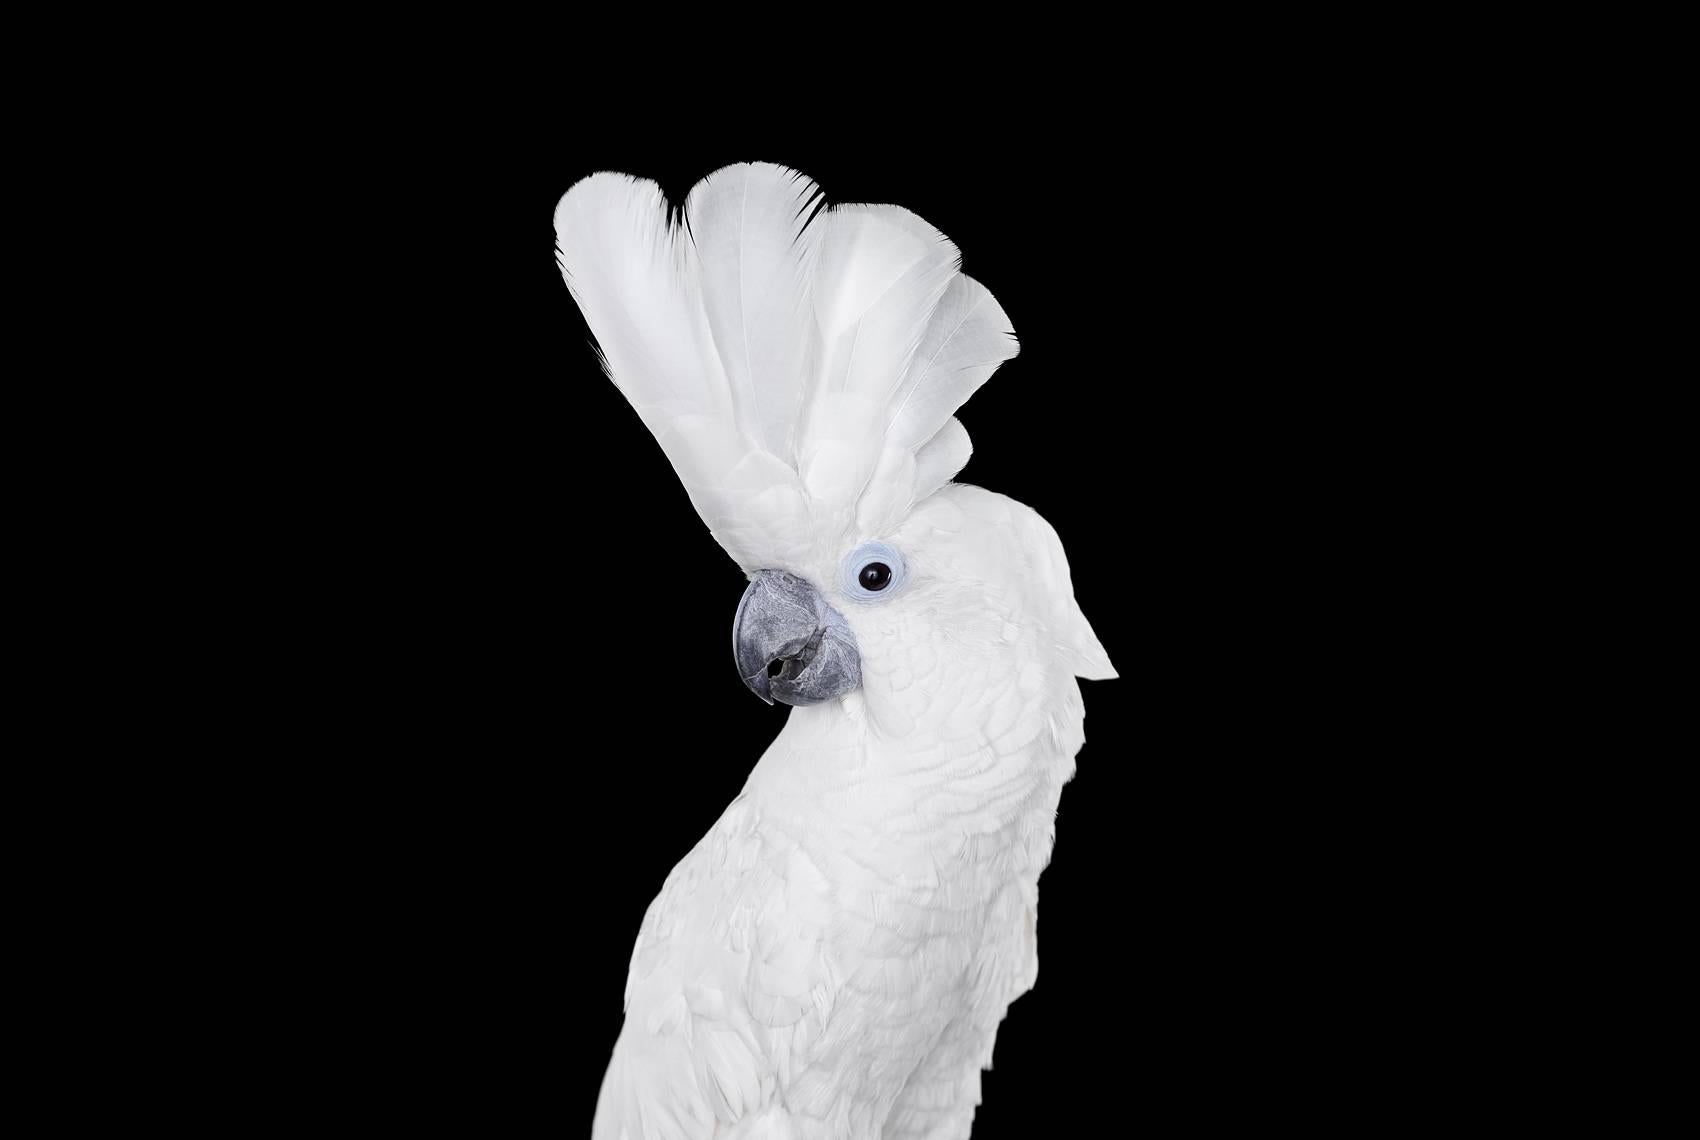 'White Cockatoo #1, Albuquerque, NM, 2016' is a limited-edition photograph by contemporary artist Brad Wilson from the ‘Affinity’ series which features studio portraits of wild animals. 

This photograph is sold unframed as a print only. It is